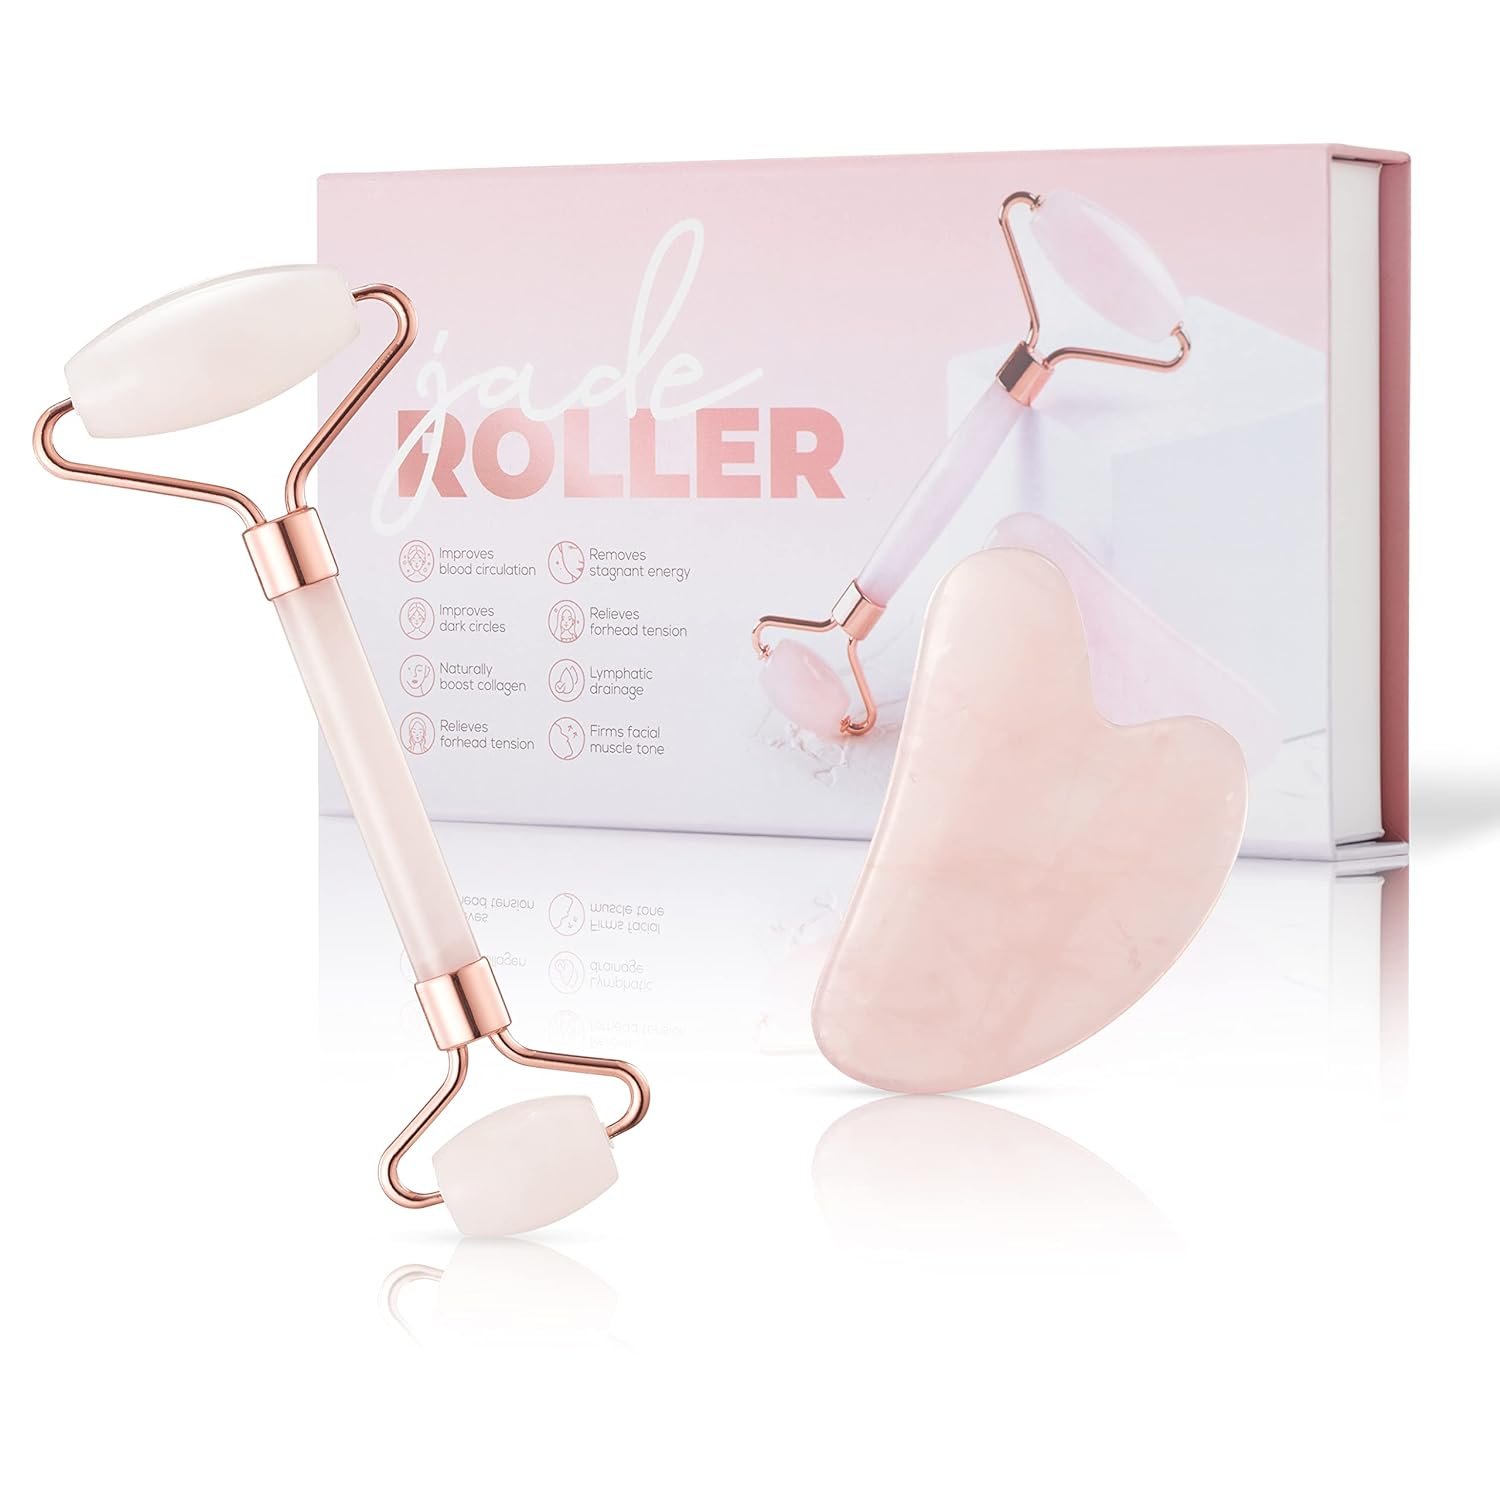 BRÜUN Jade Roller and Gua Sha Kit Genuine Rose Quartz for Face and Neck Massage – A Skin Care Roller for Facial Beauty – A Unique Gift Set for Women and girls on Birthday and Wedding